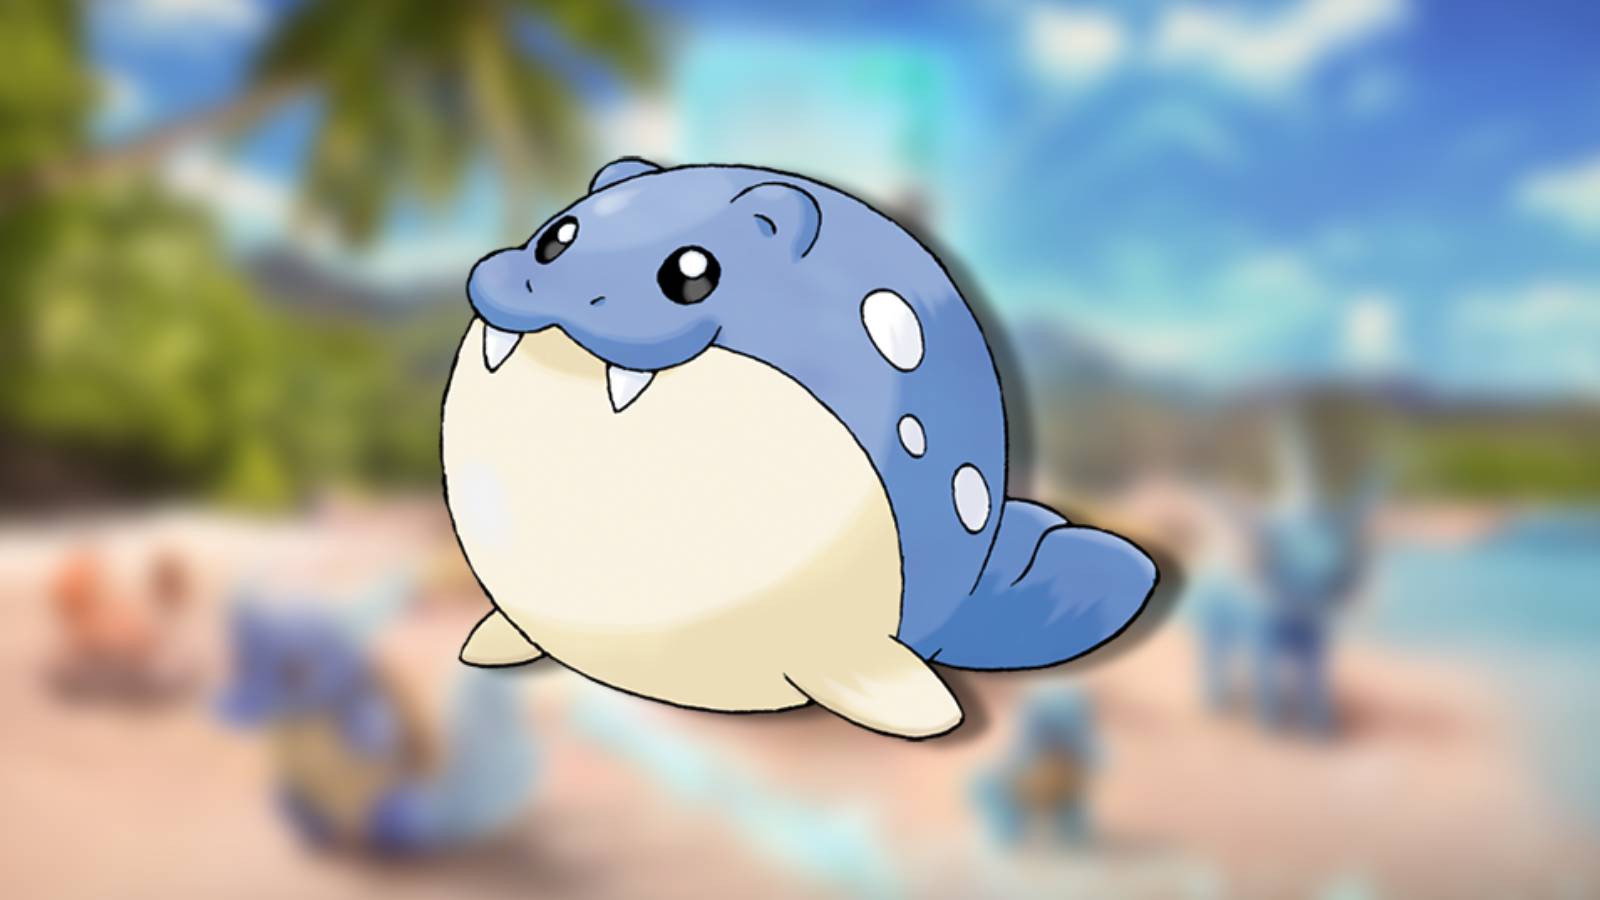 Key art shows the pokemon Spheal against a blurred background